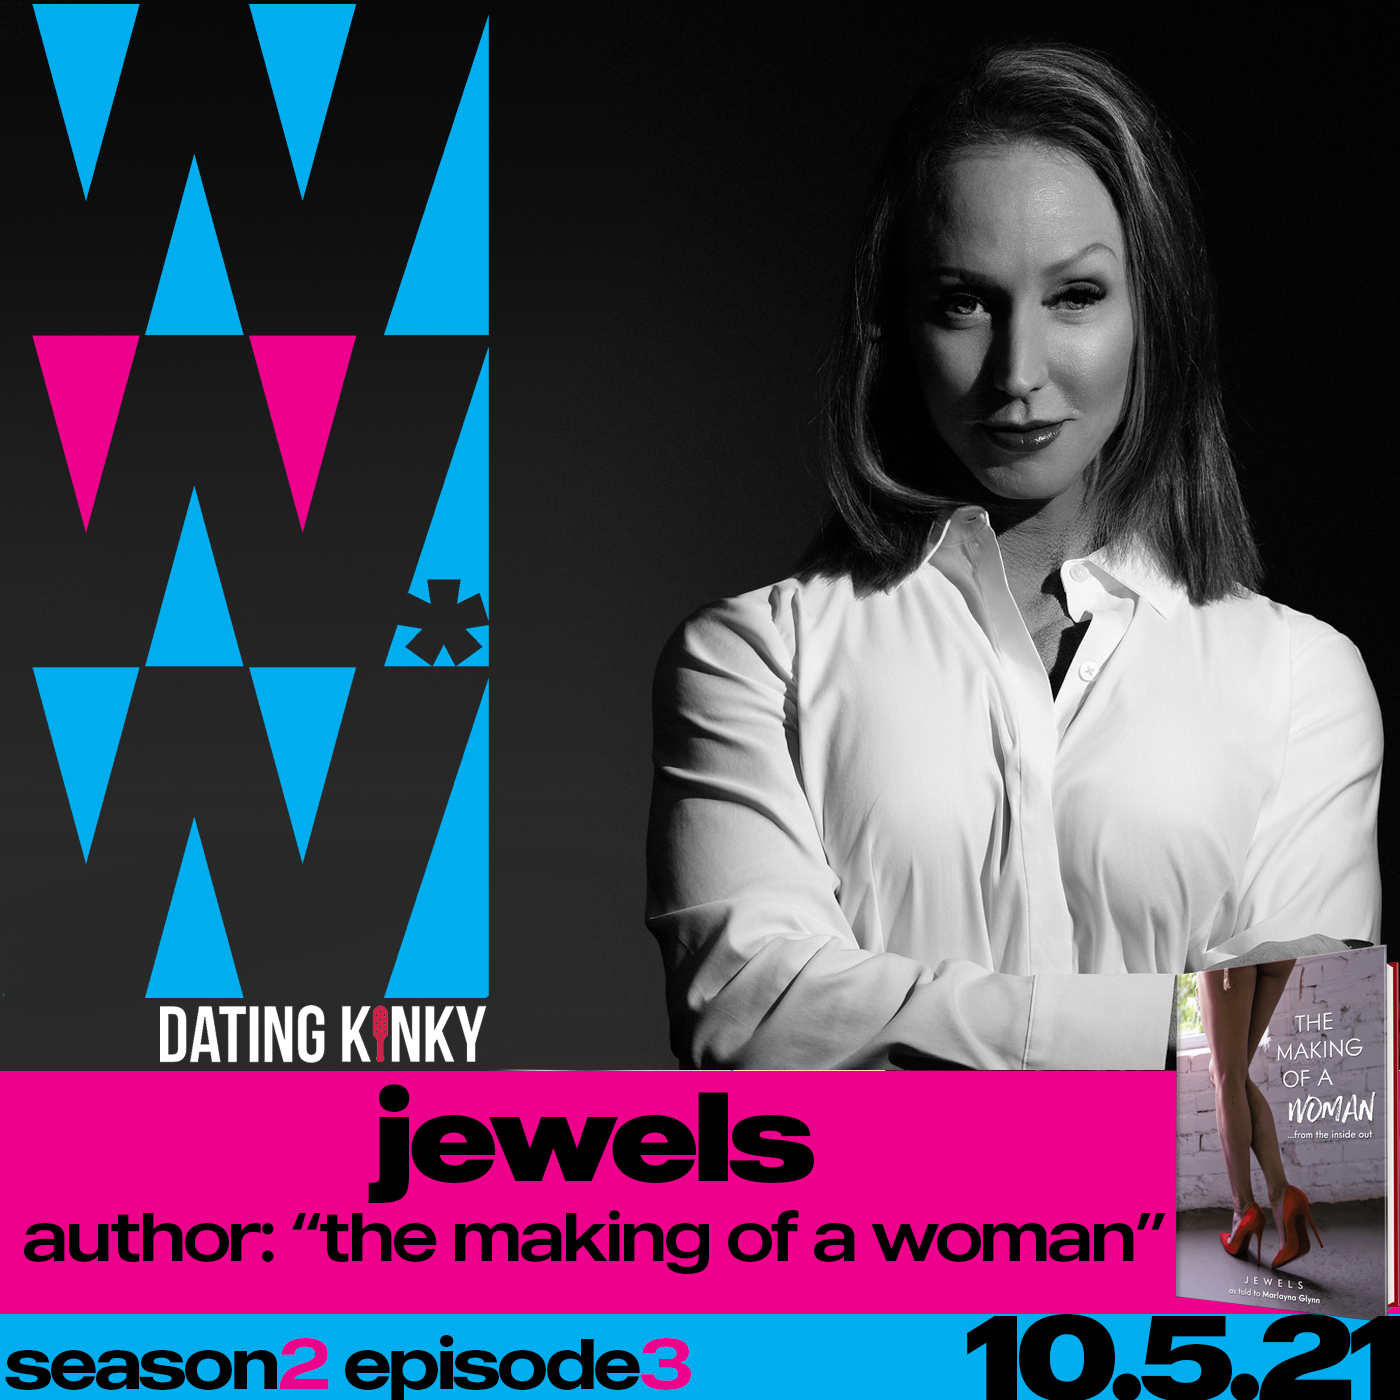 Jewels: The Making of a Woman